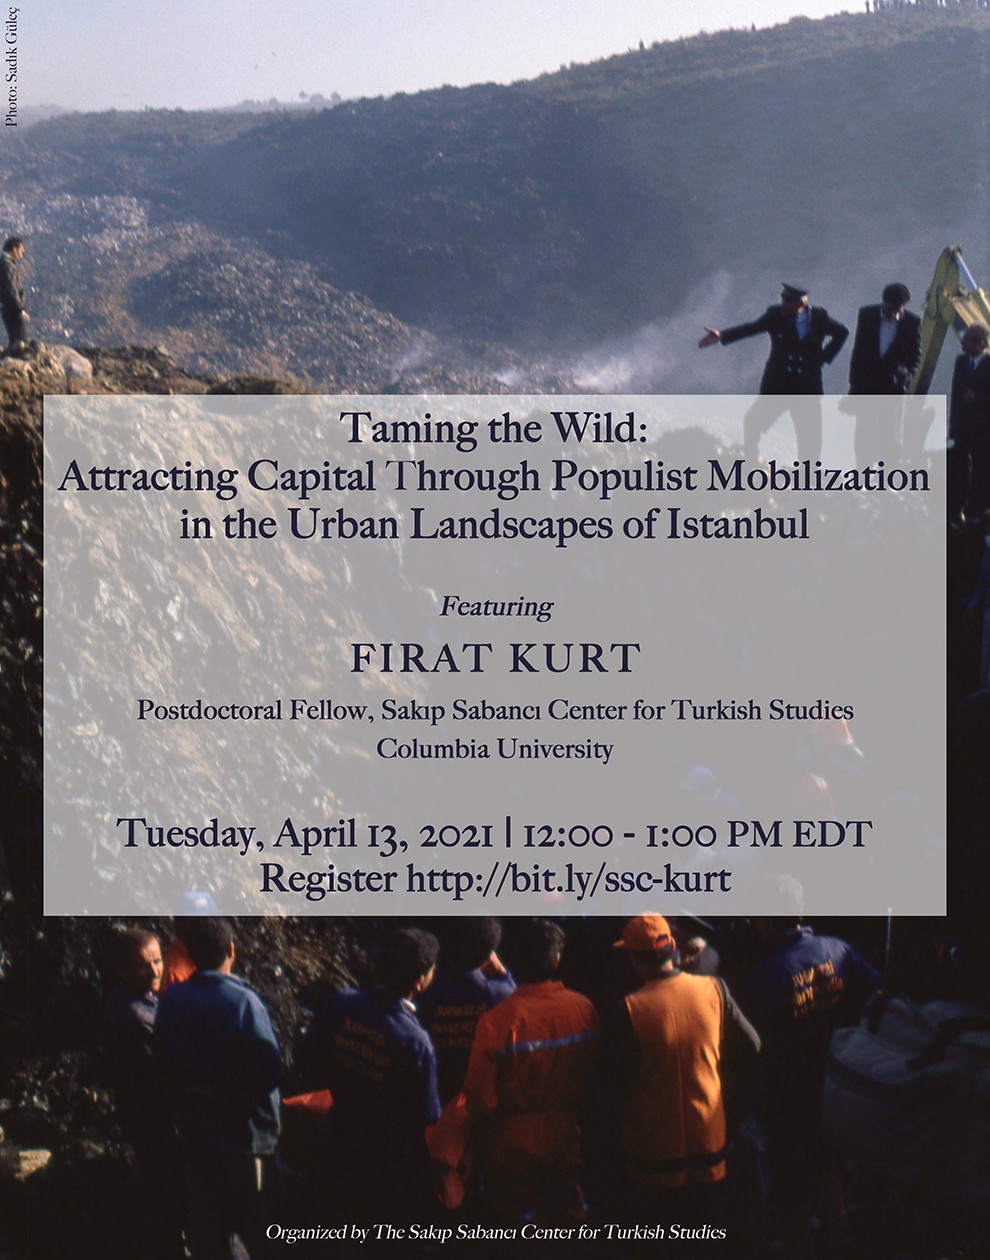 Poster for event Taming the Wild: Attracting Capital Through Populist Mobilization in the Urban Landscapes of Istanbul